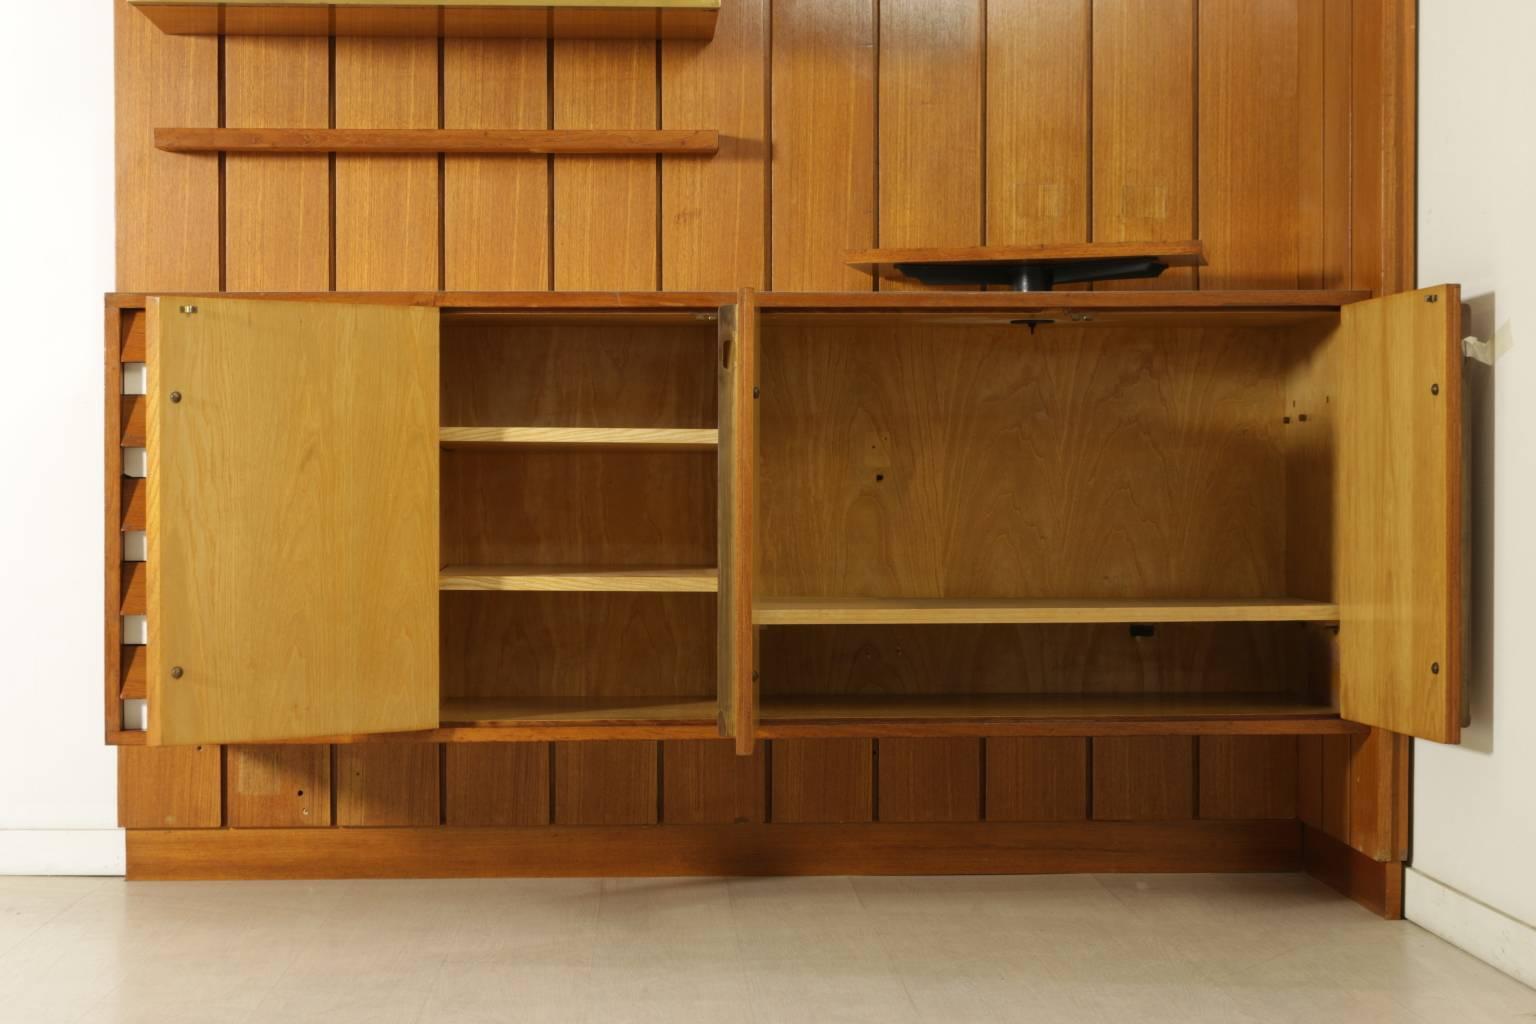 A sitting room cabinet designed for a private client in Milan, composed of wainscoat, closed and open compartments, shelves, adjustable TV stand. Teak veneer, formica, brass, screen printed decorative panel. Manufactured in Italy, 1960s.